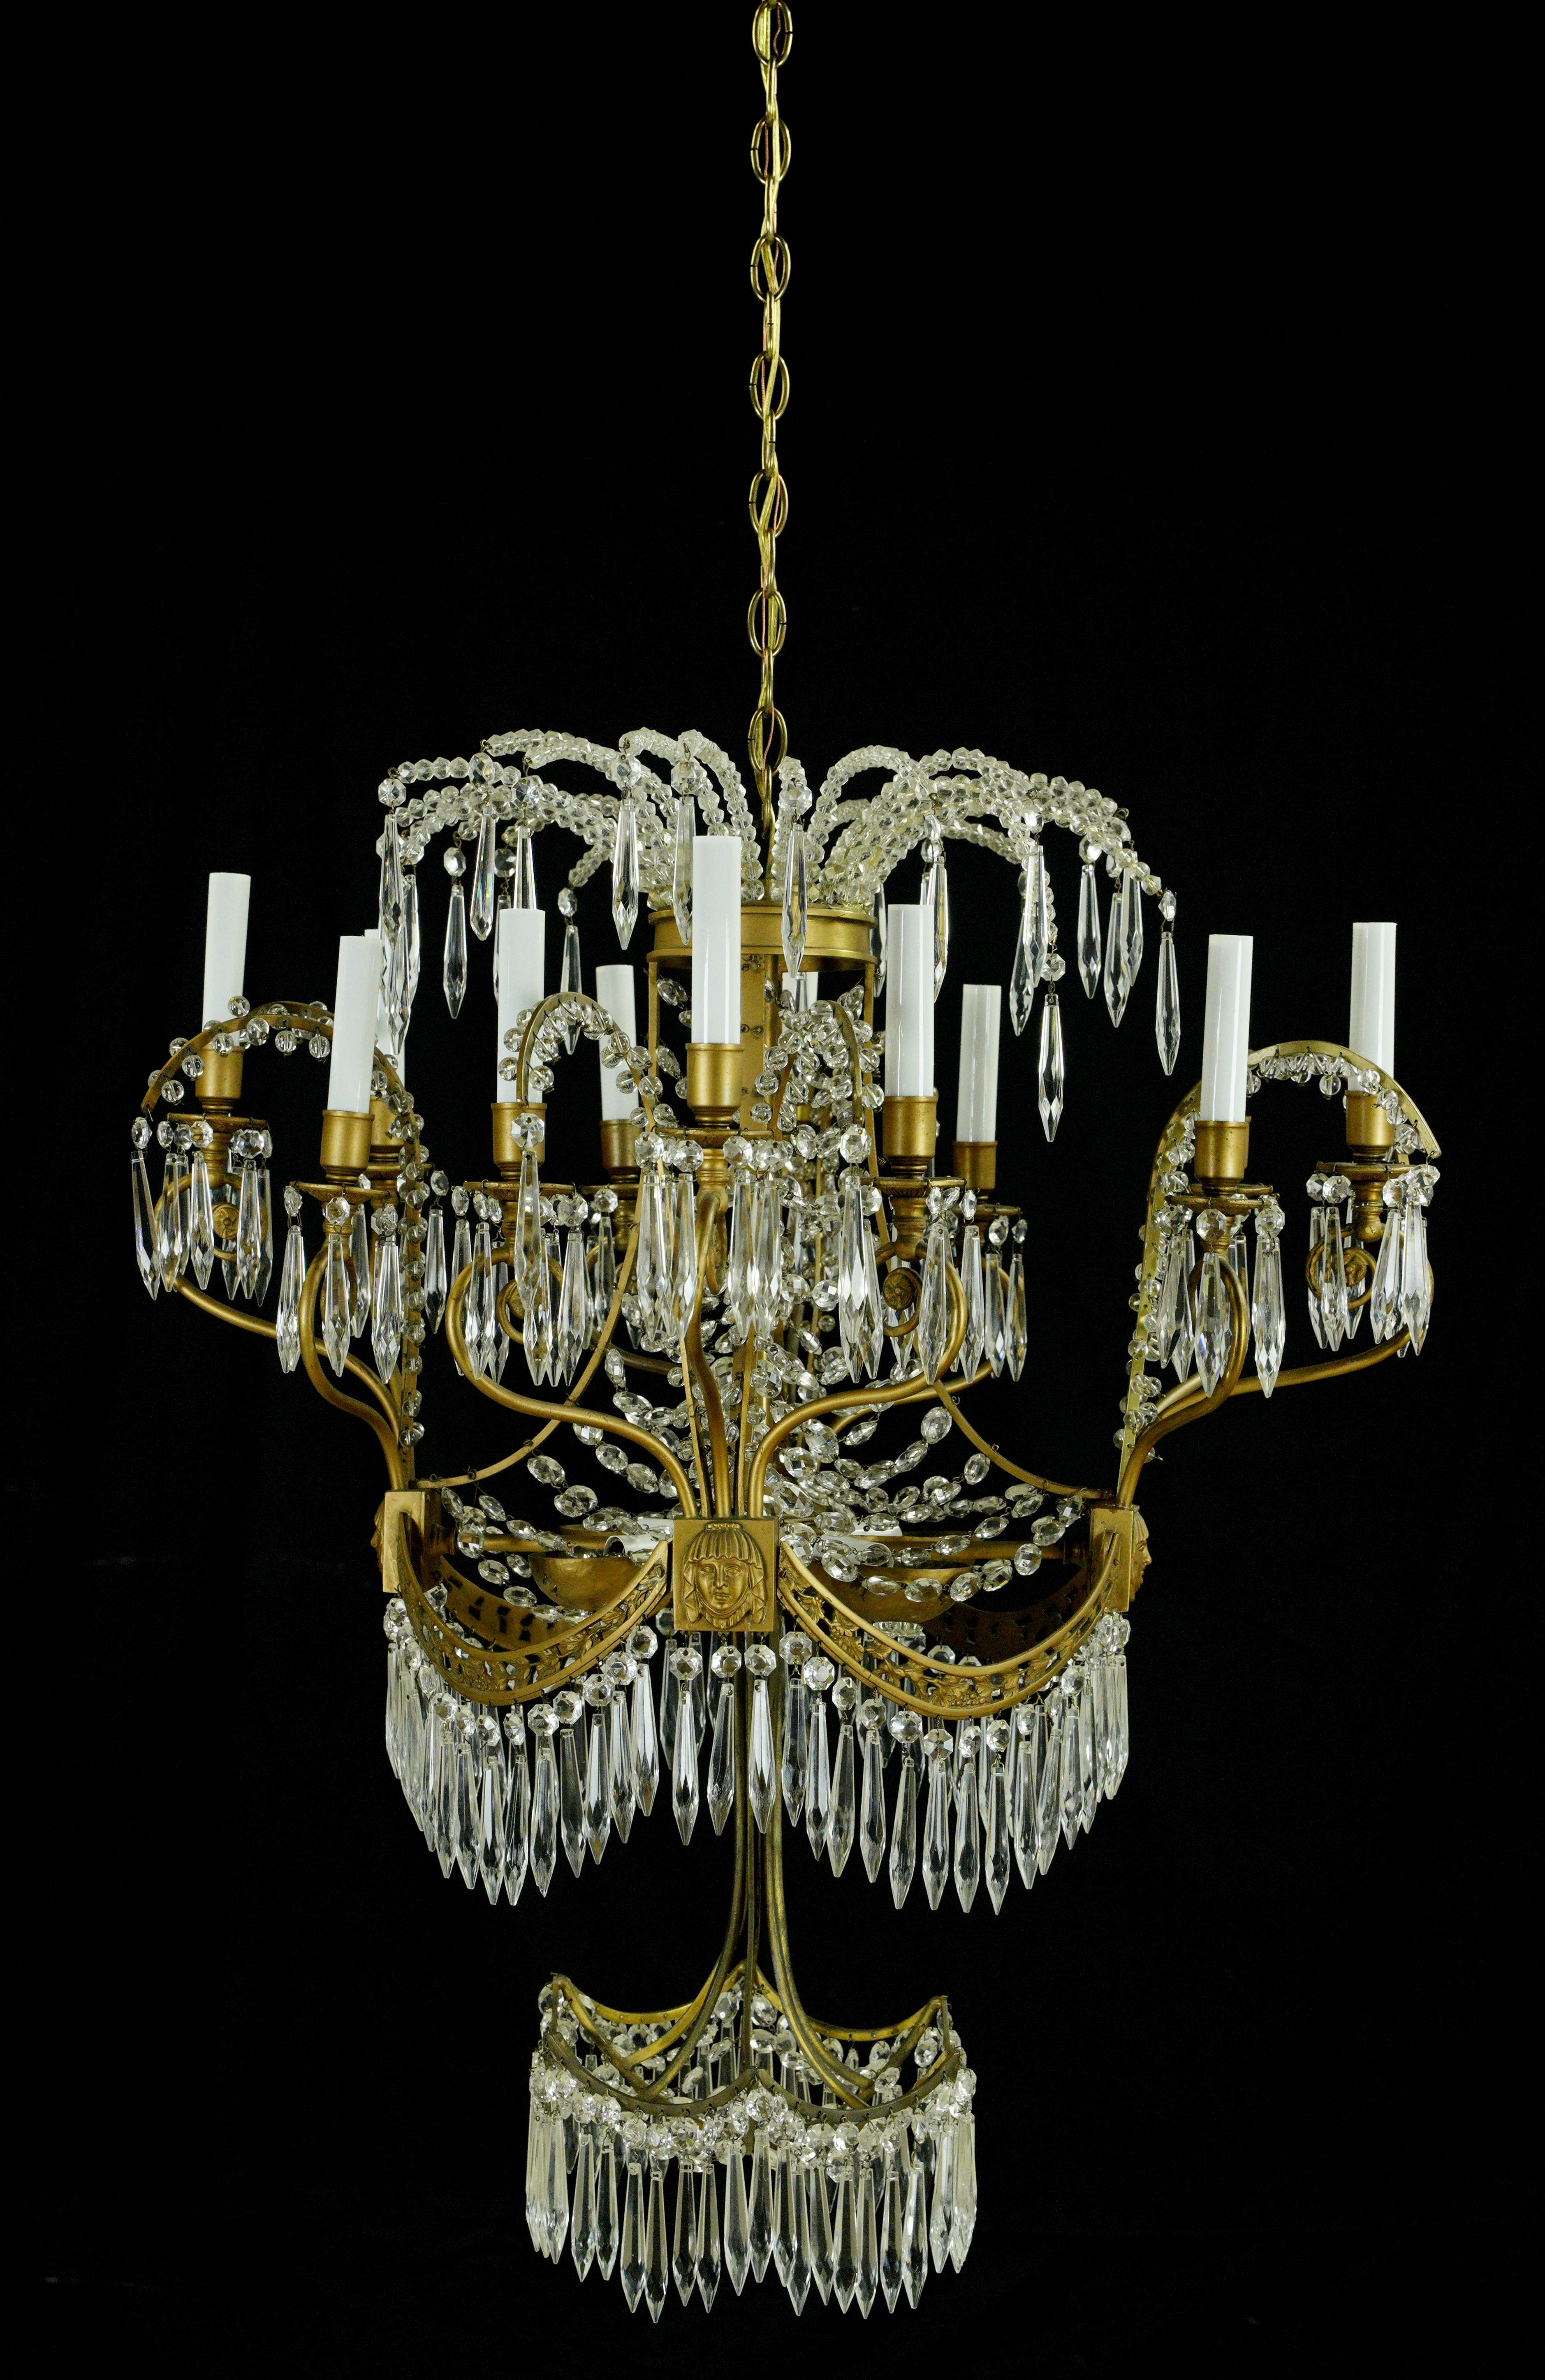 Plaza Hotel Russia 12 Arm Crystal Dore Bronze Chandelier In Good Condition For Sale In New York, NY